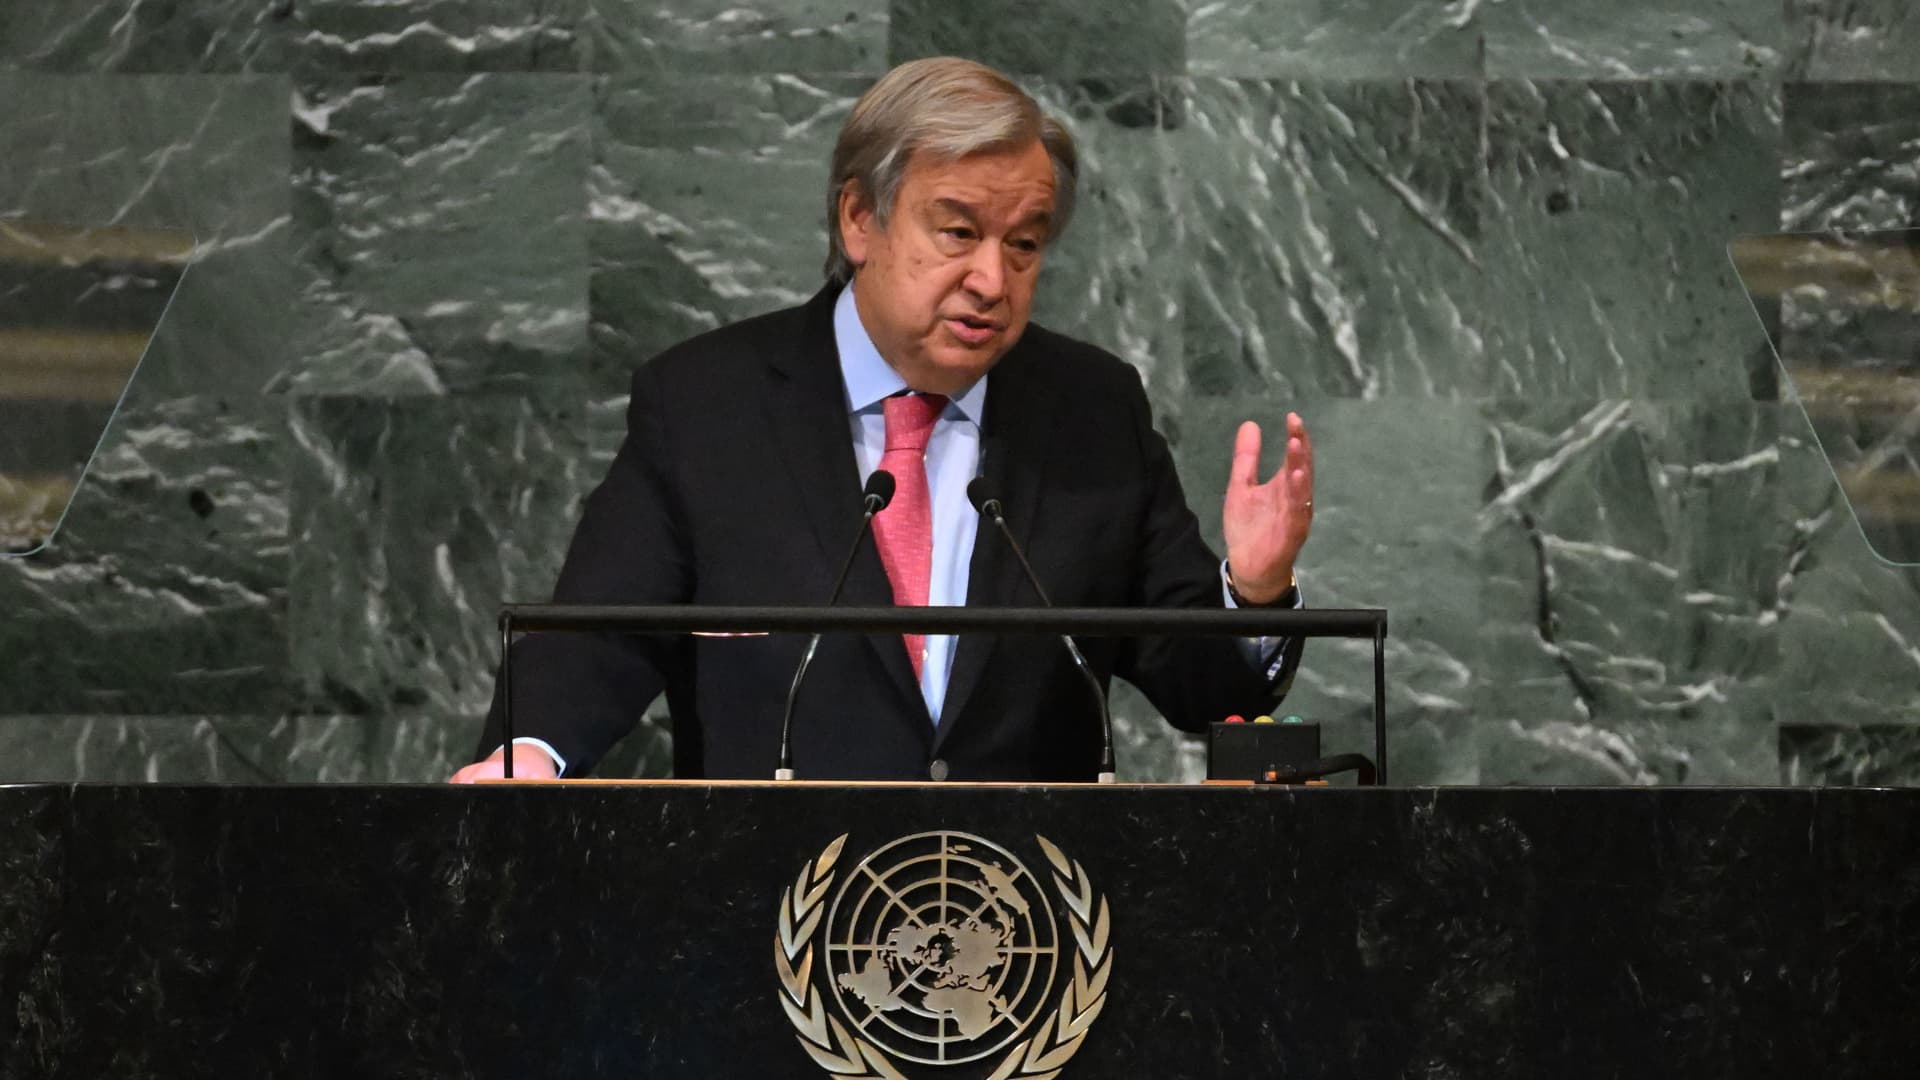 ‘Our world is in peril,’ UN chief says in opening General Assembly address